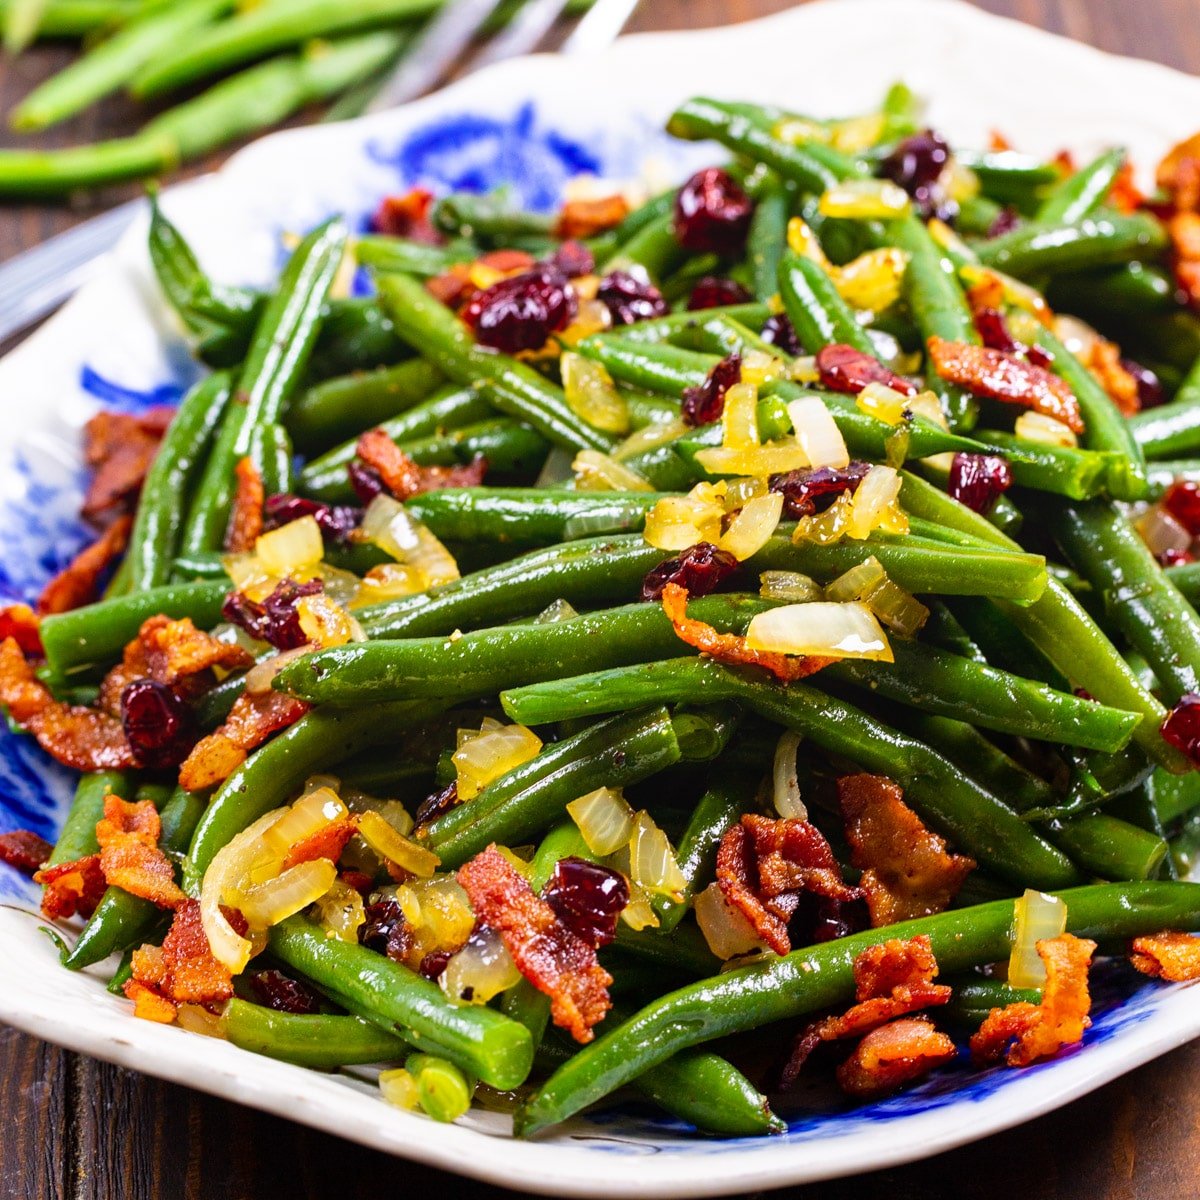 Maple-Glazed Green Beans topped with crumbled bacon on a serving platter.